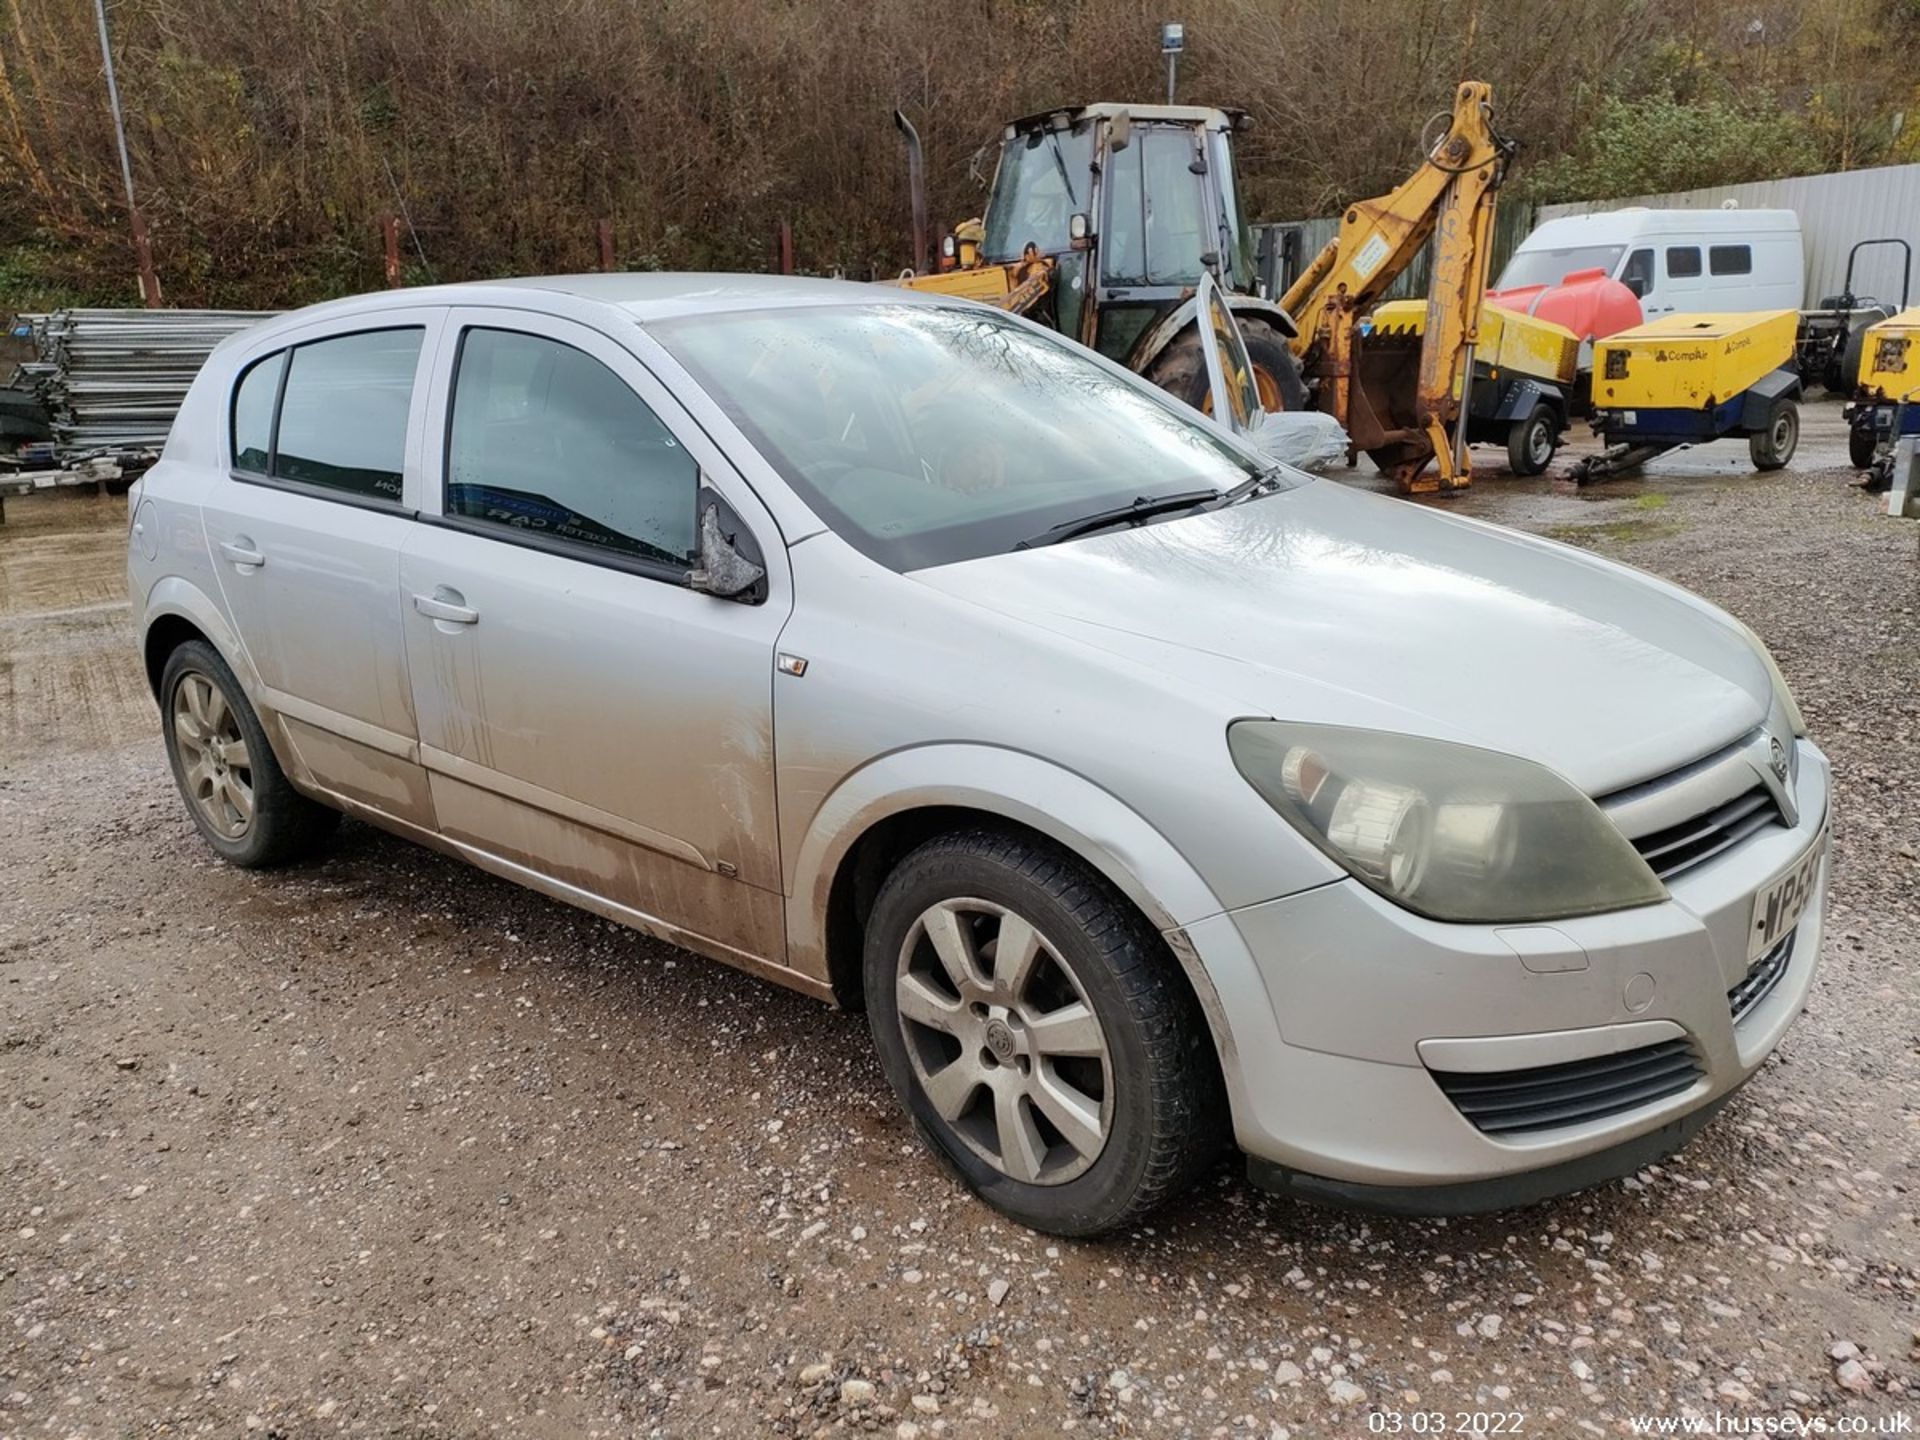 06/55 VAUXHALL ASTRA BREEZE - 1598cc 5dr Hatchback (Silver) - Image 15 of 23